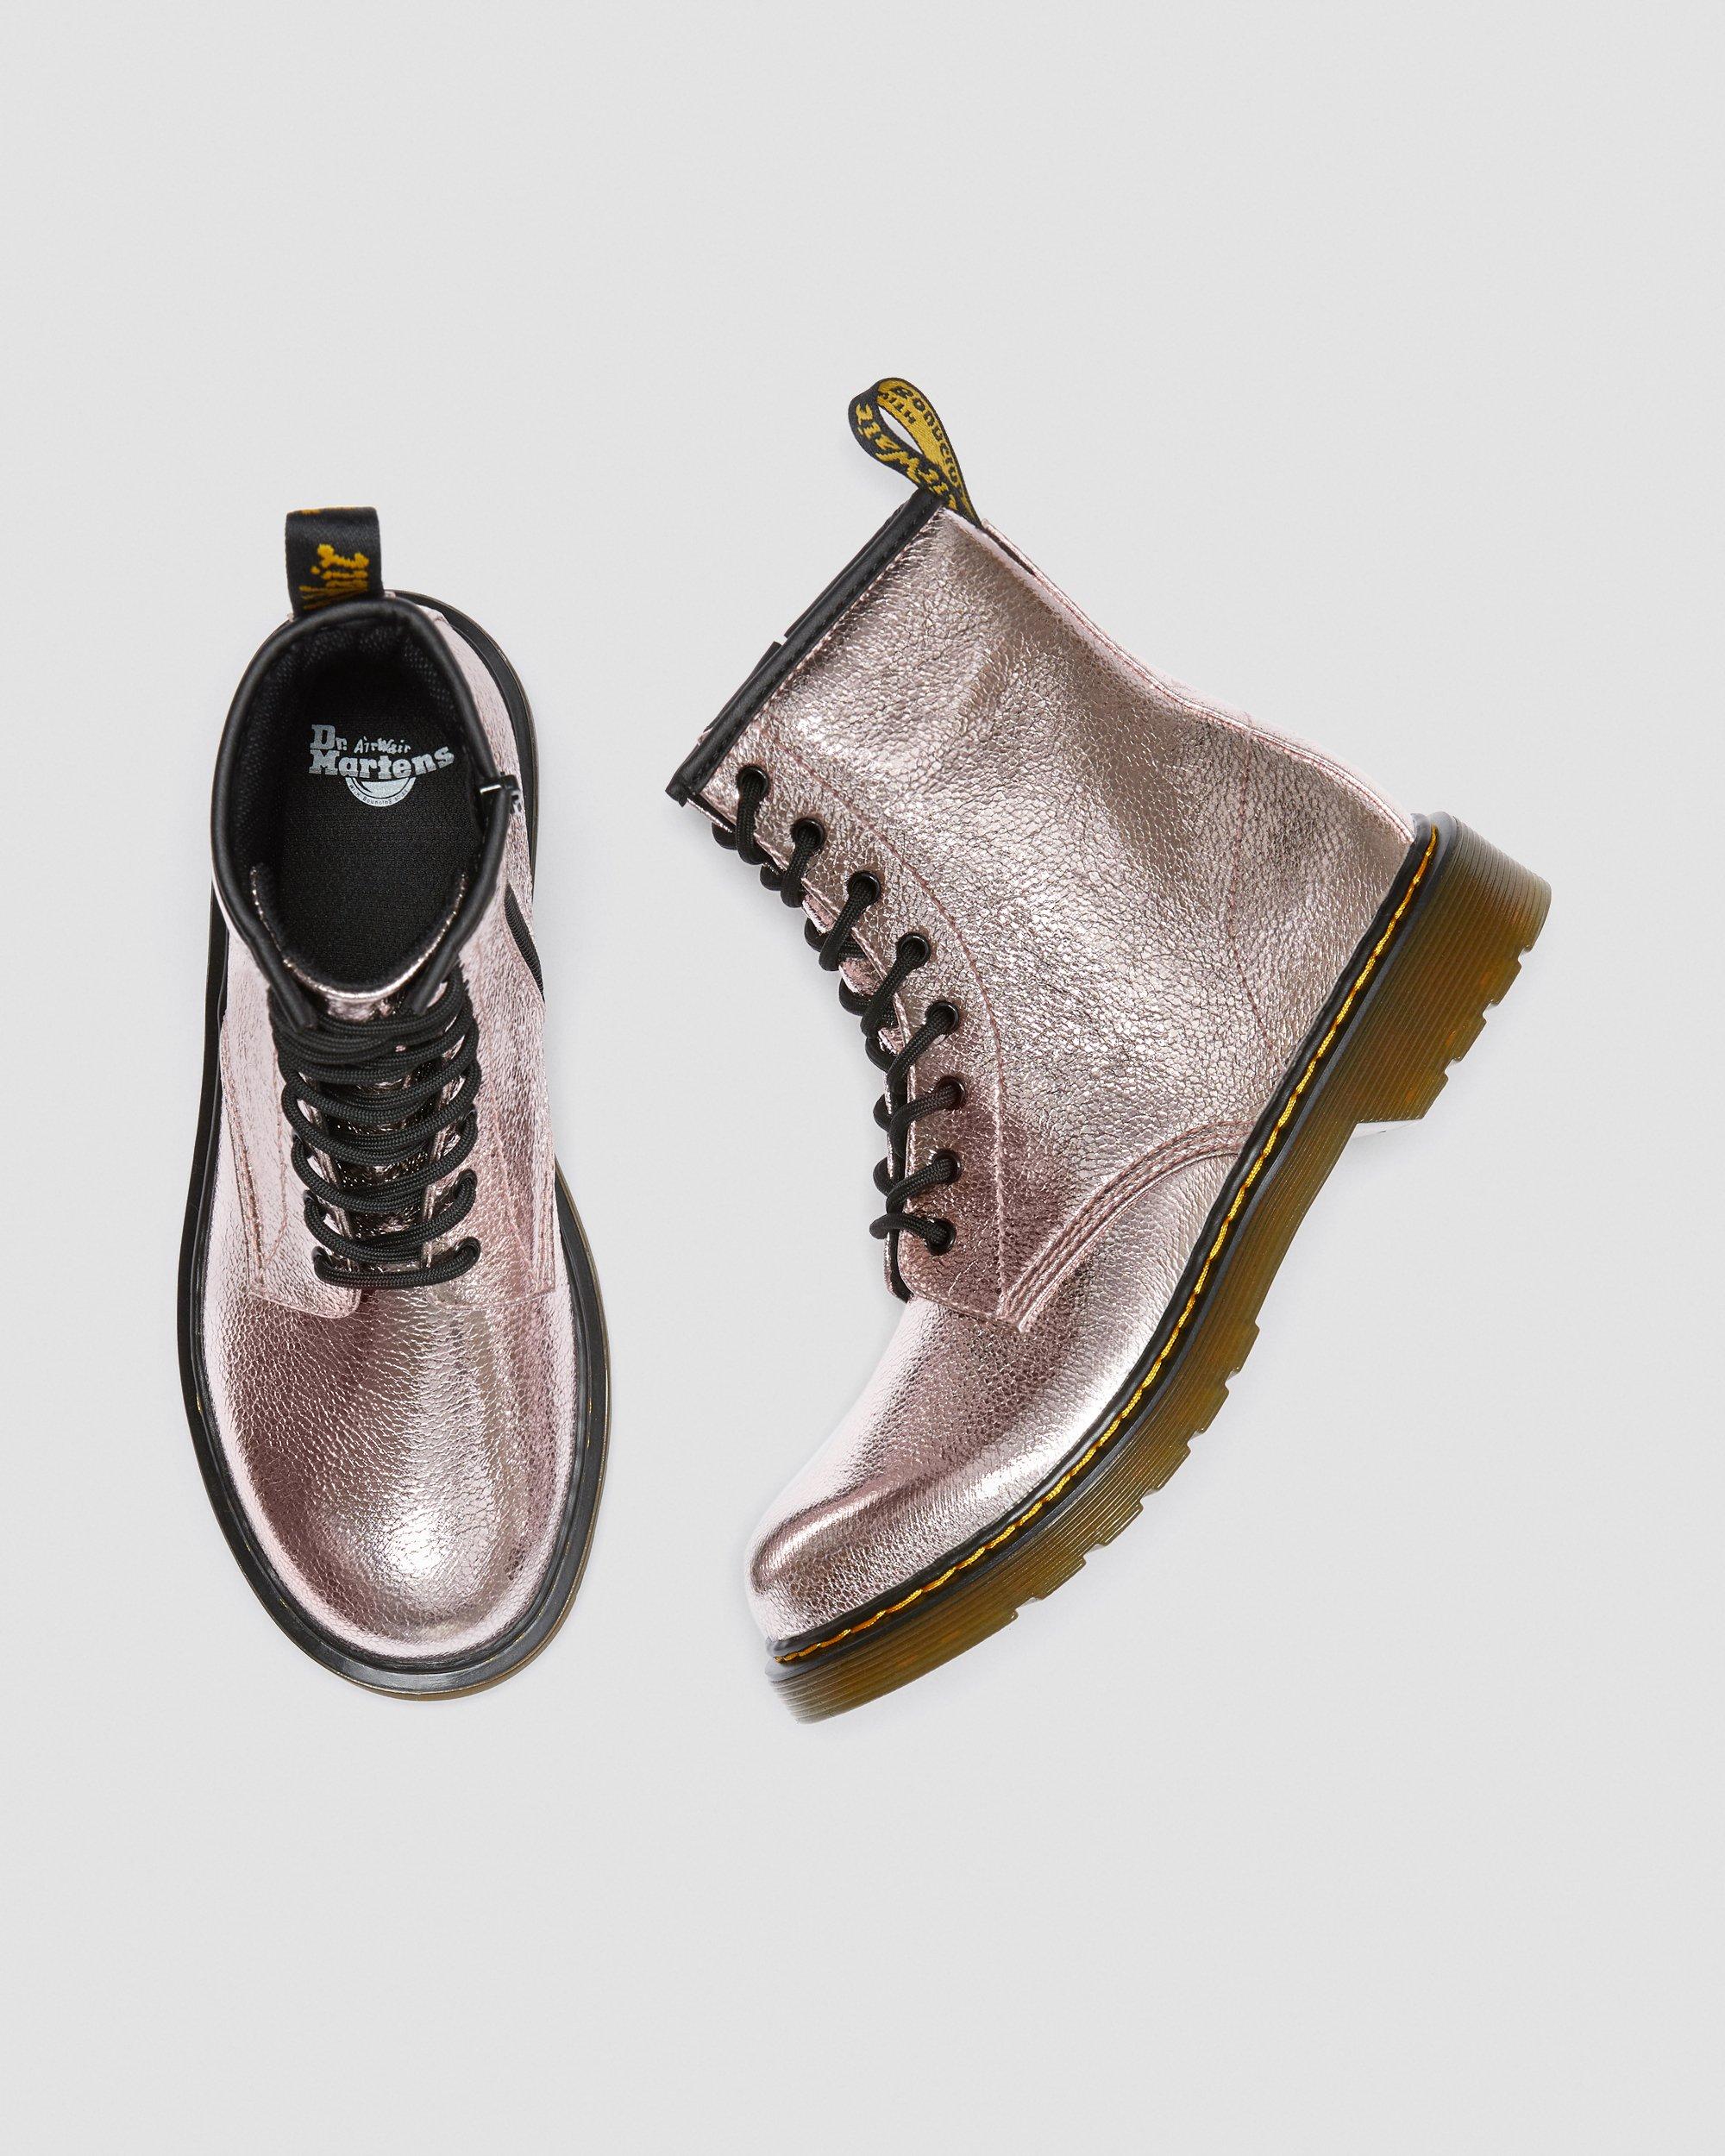 Youth 1460 Crinkle Metallic Lace Up Boots | Dr. Martens